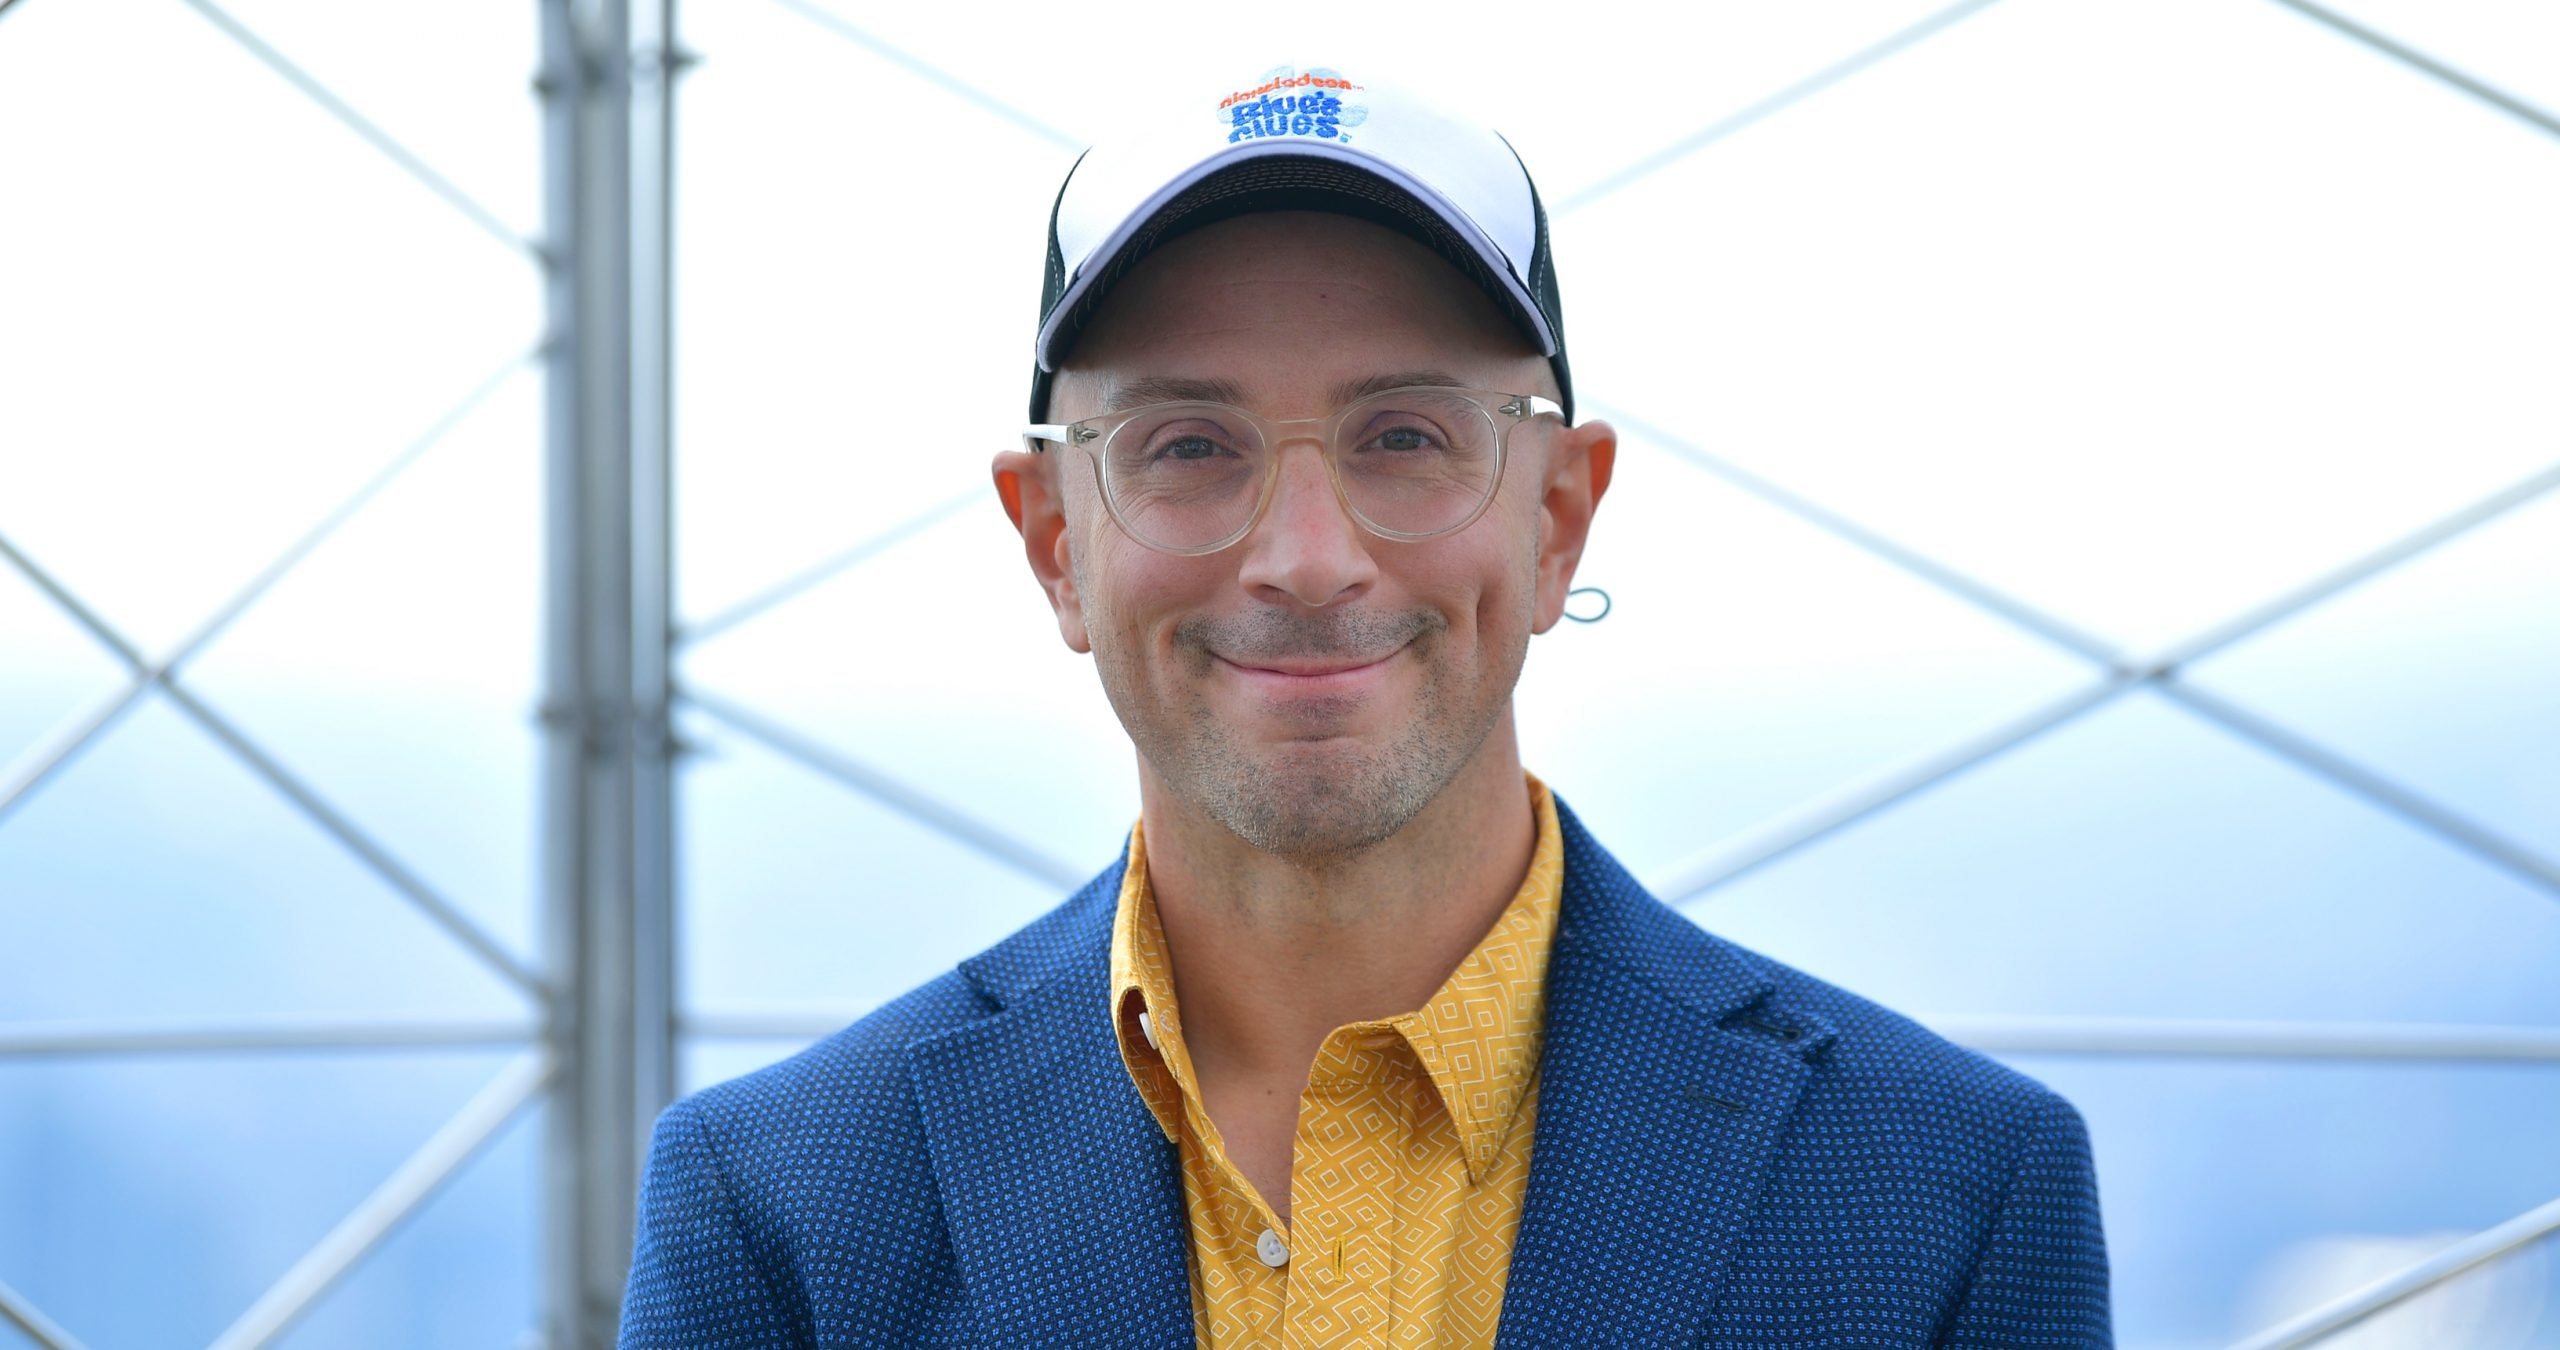 ‘Blue’s Clues’ host Steve Burns at 25th Anniversary celebration in a blue suit jacket and yellow button up.